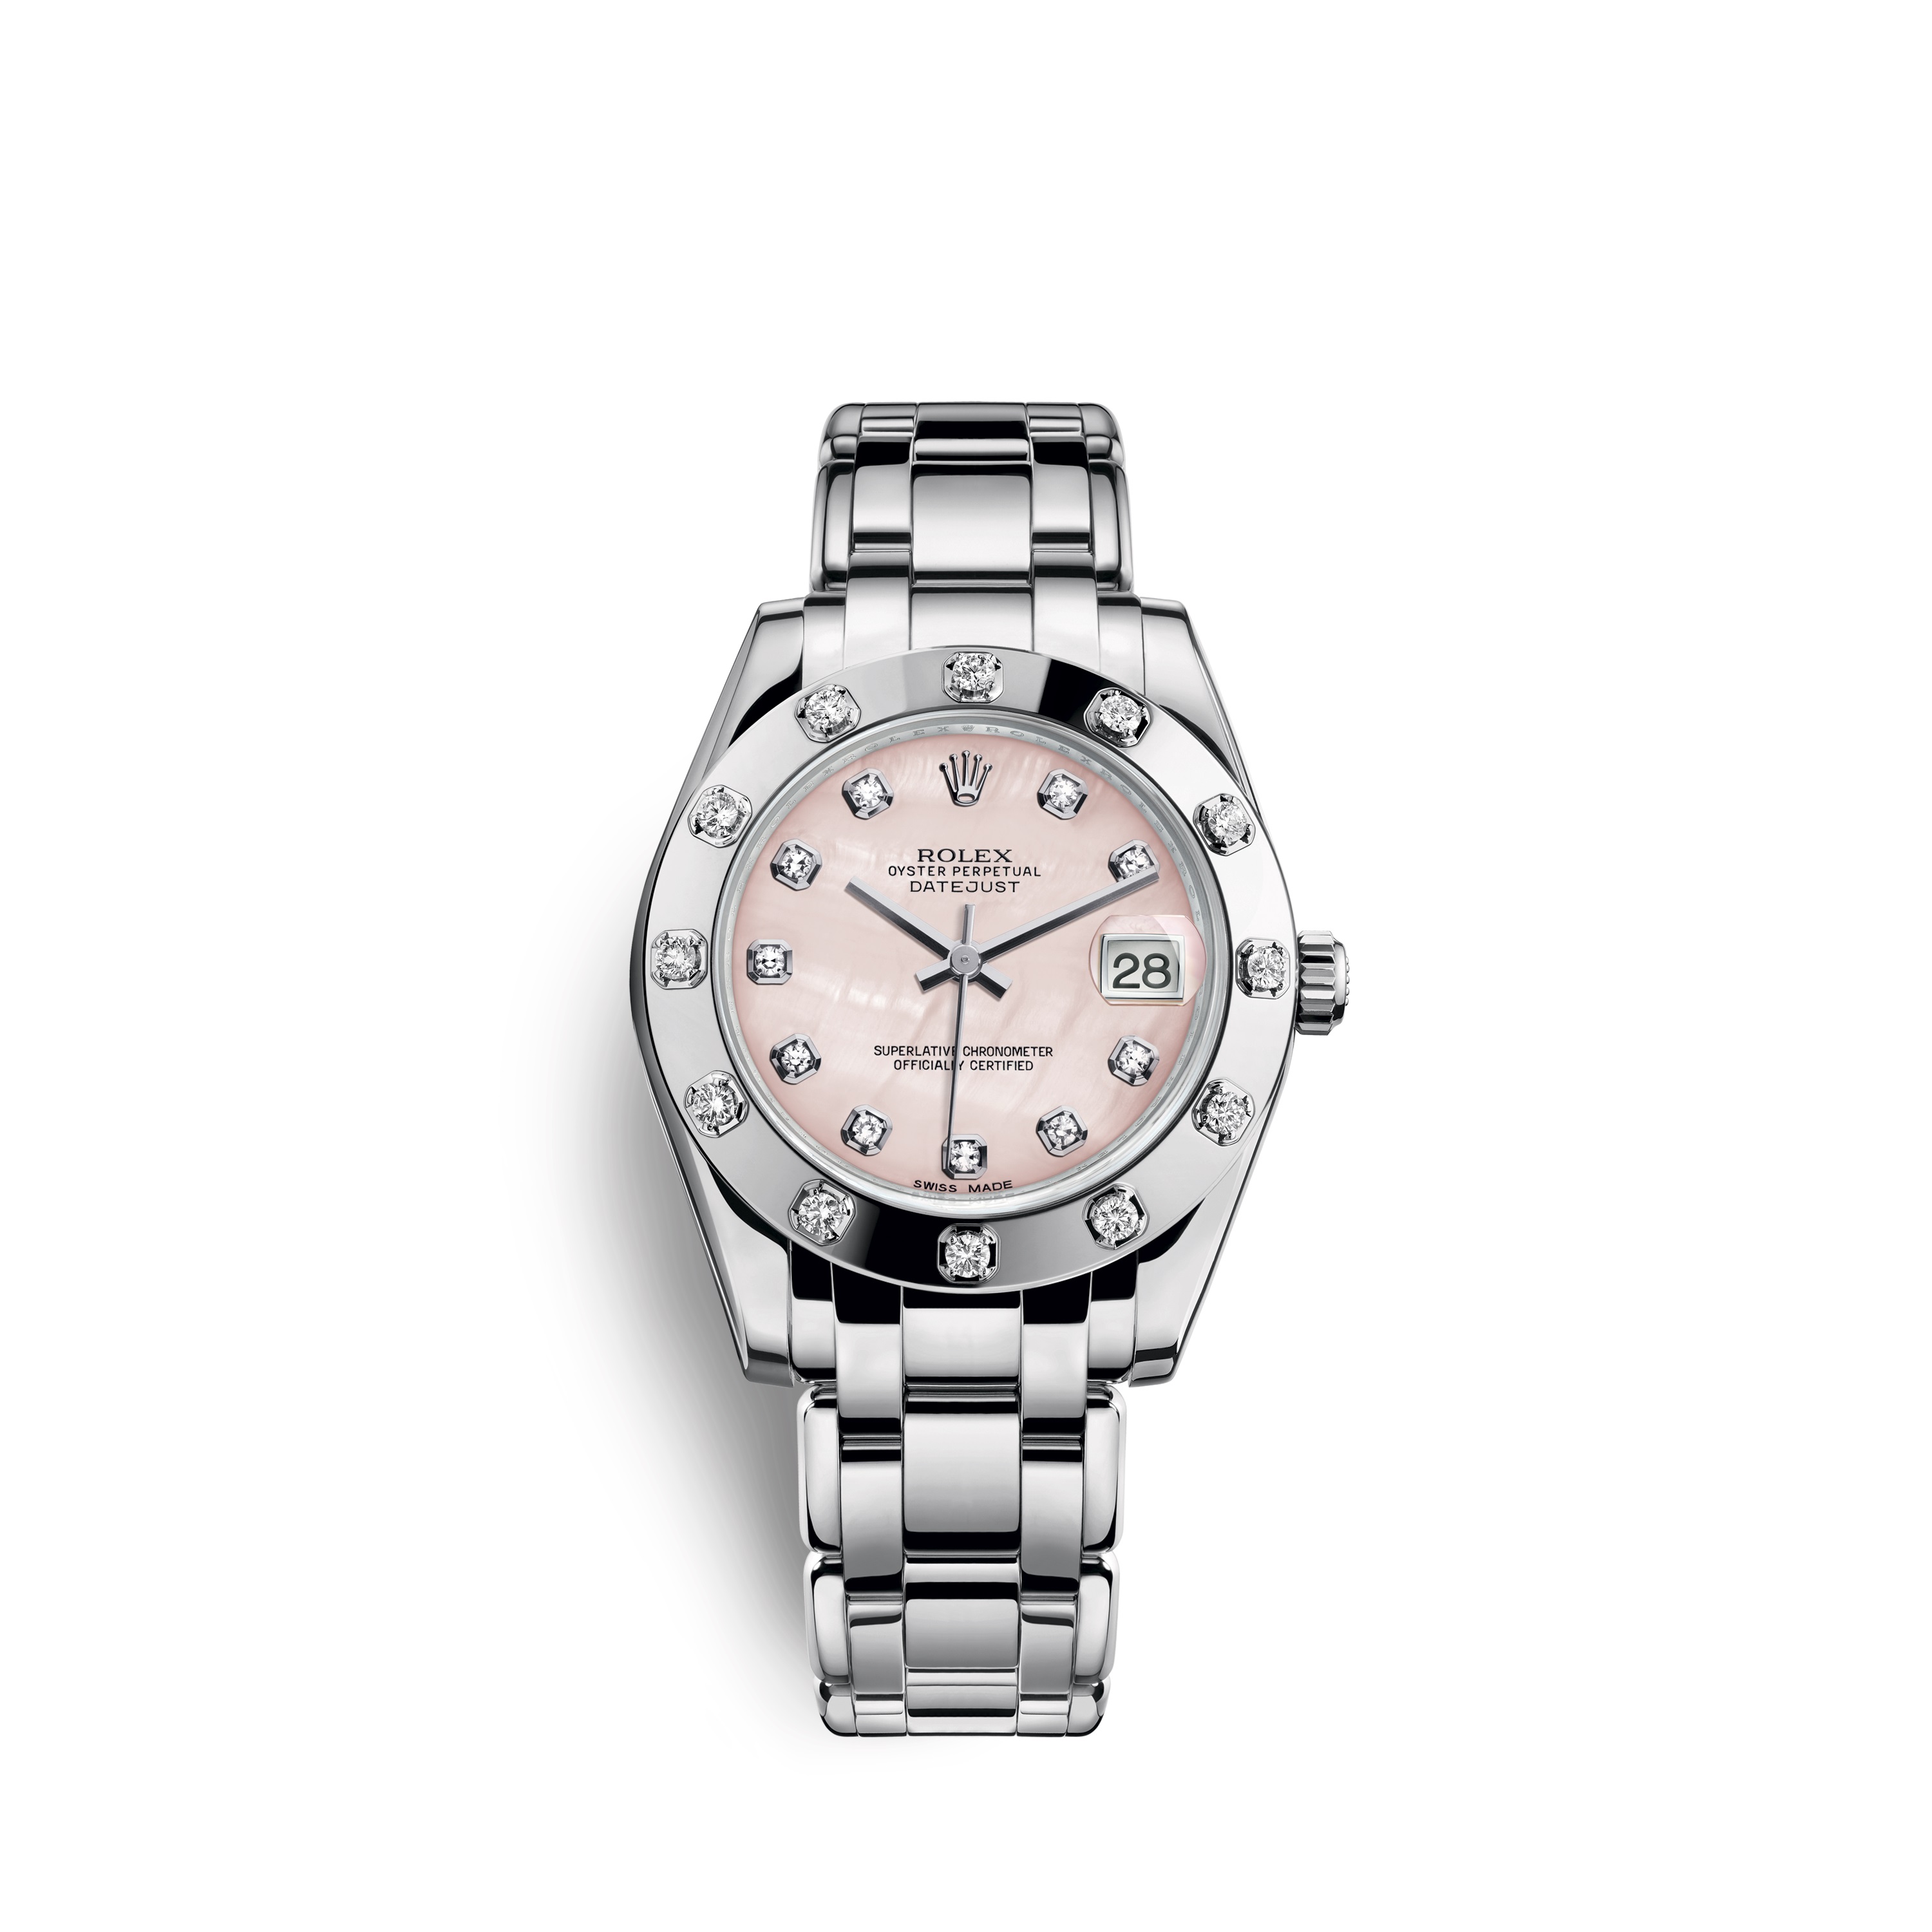 Pearlmaster 34 81319 White Gold & Diamonds Watch (Pink Mother-of-Pearl Set with Diamonds)